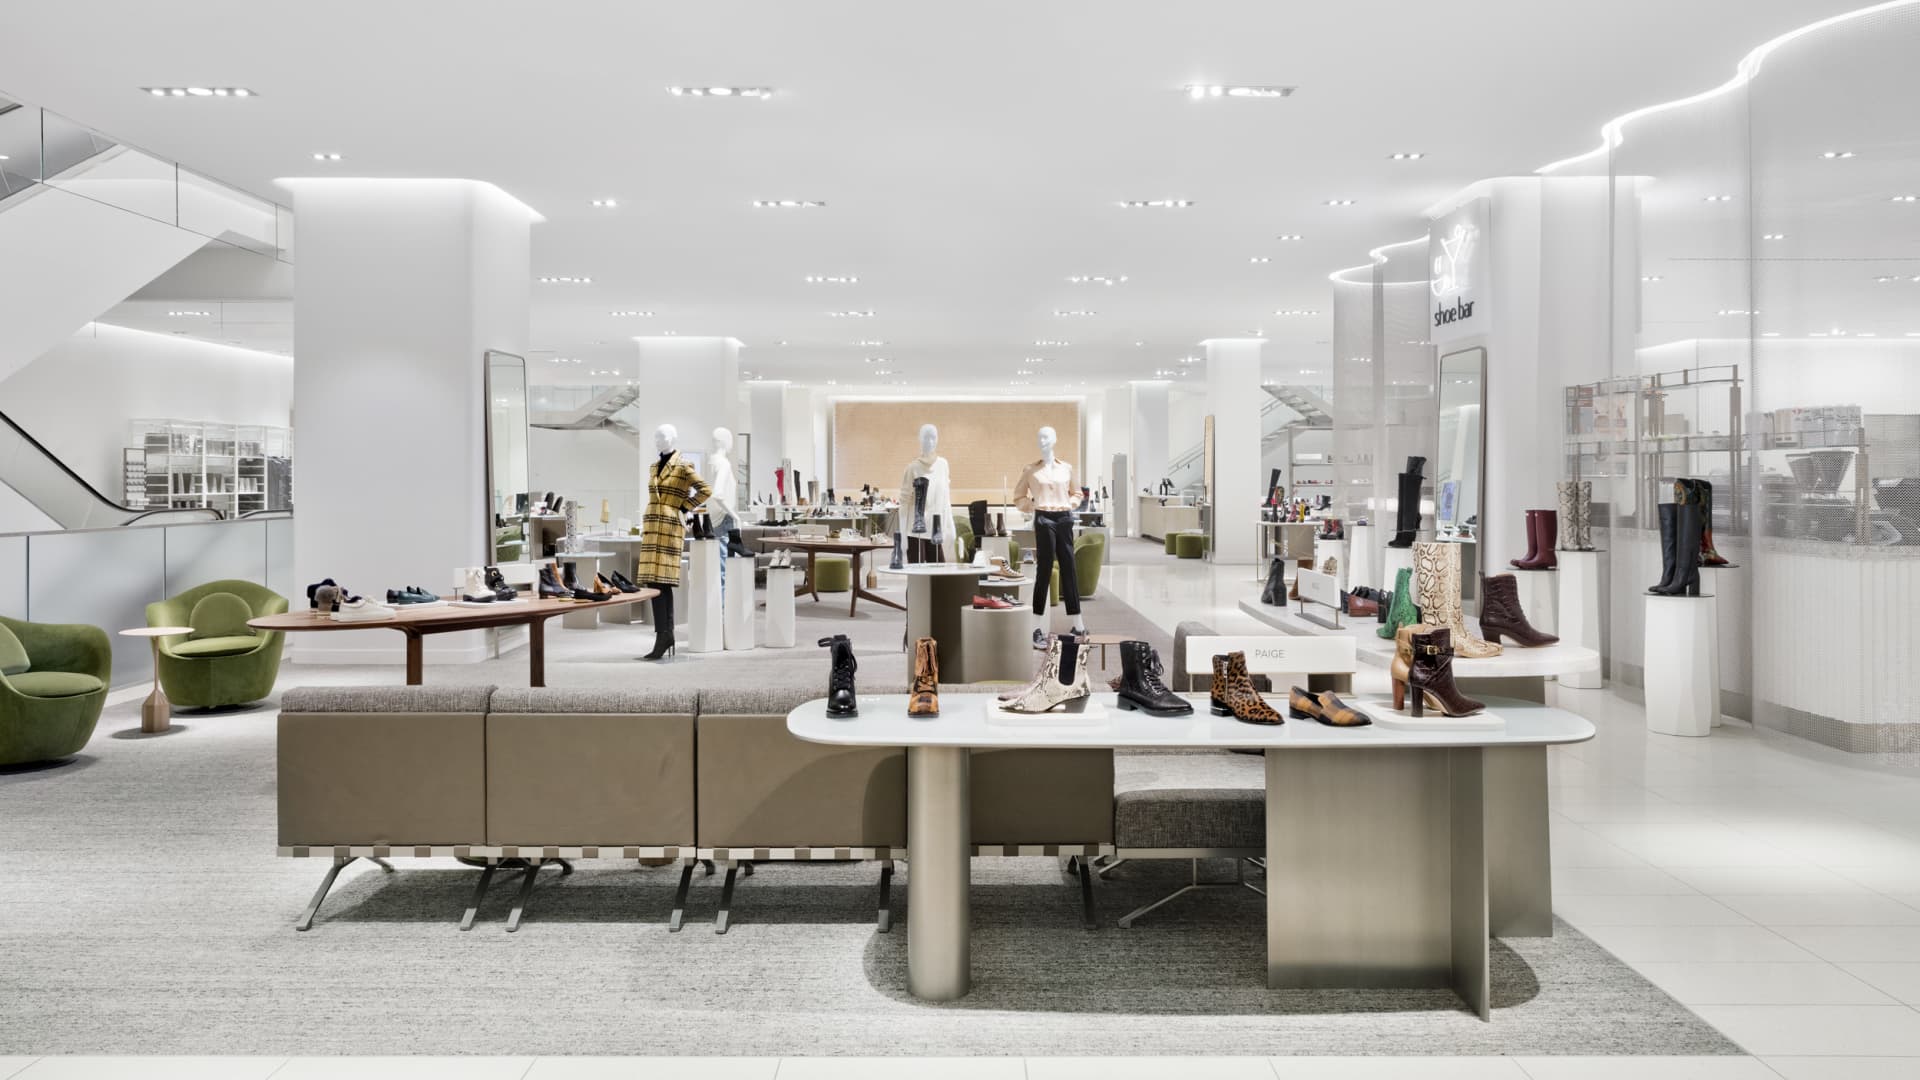 Department stores are still Americans' top place to buy shoes